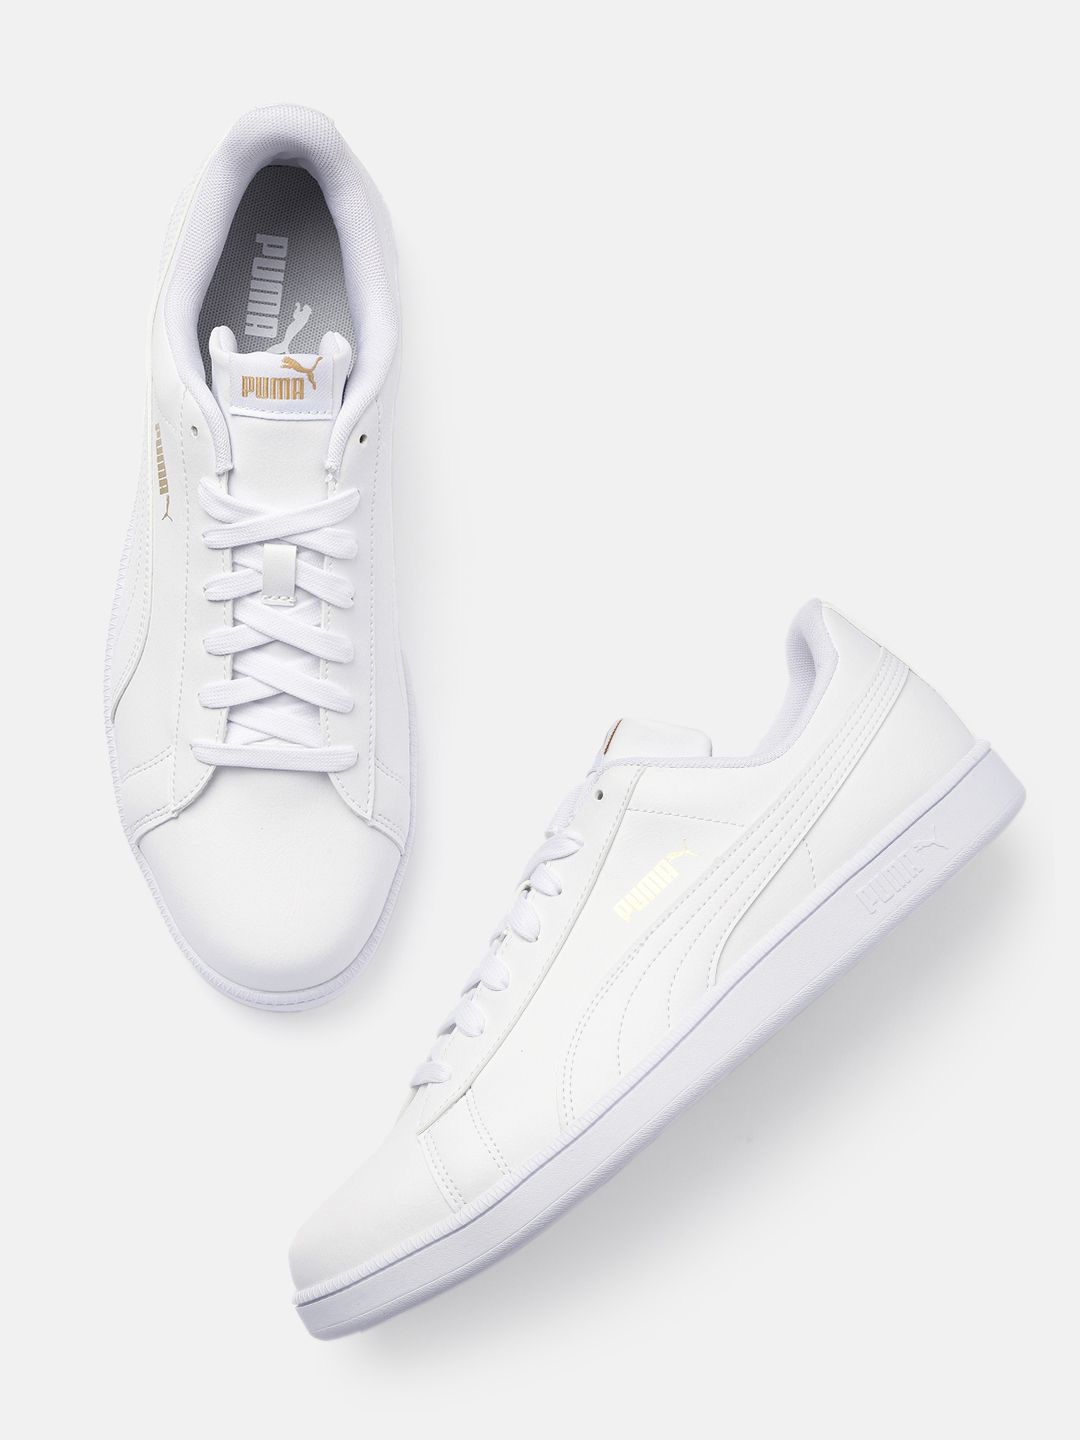 Puma Unisex White Up Baseline Sneakers Price in India